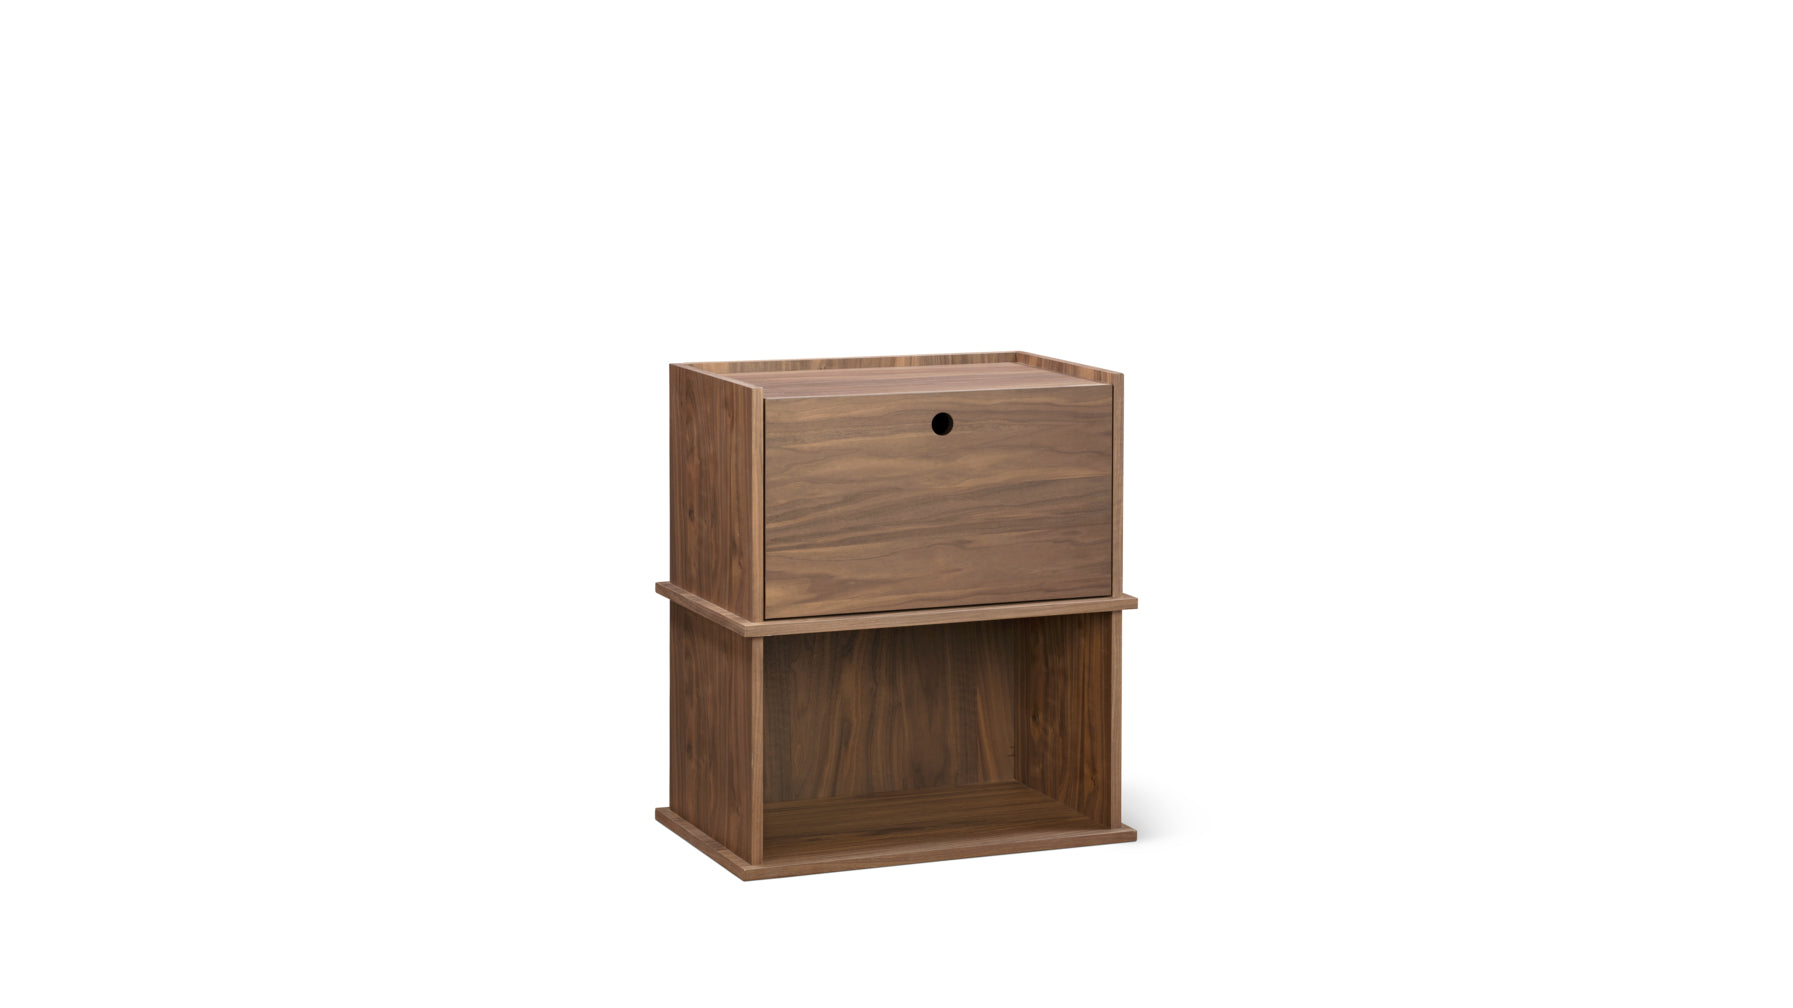 Keep Stacking Storage System 2-Piece, Open and Closed, Walnut - Image 1